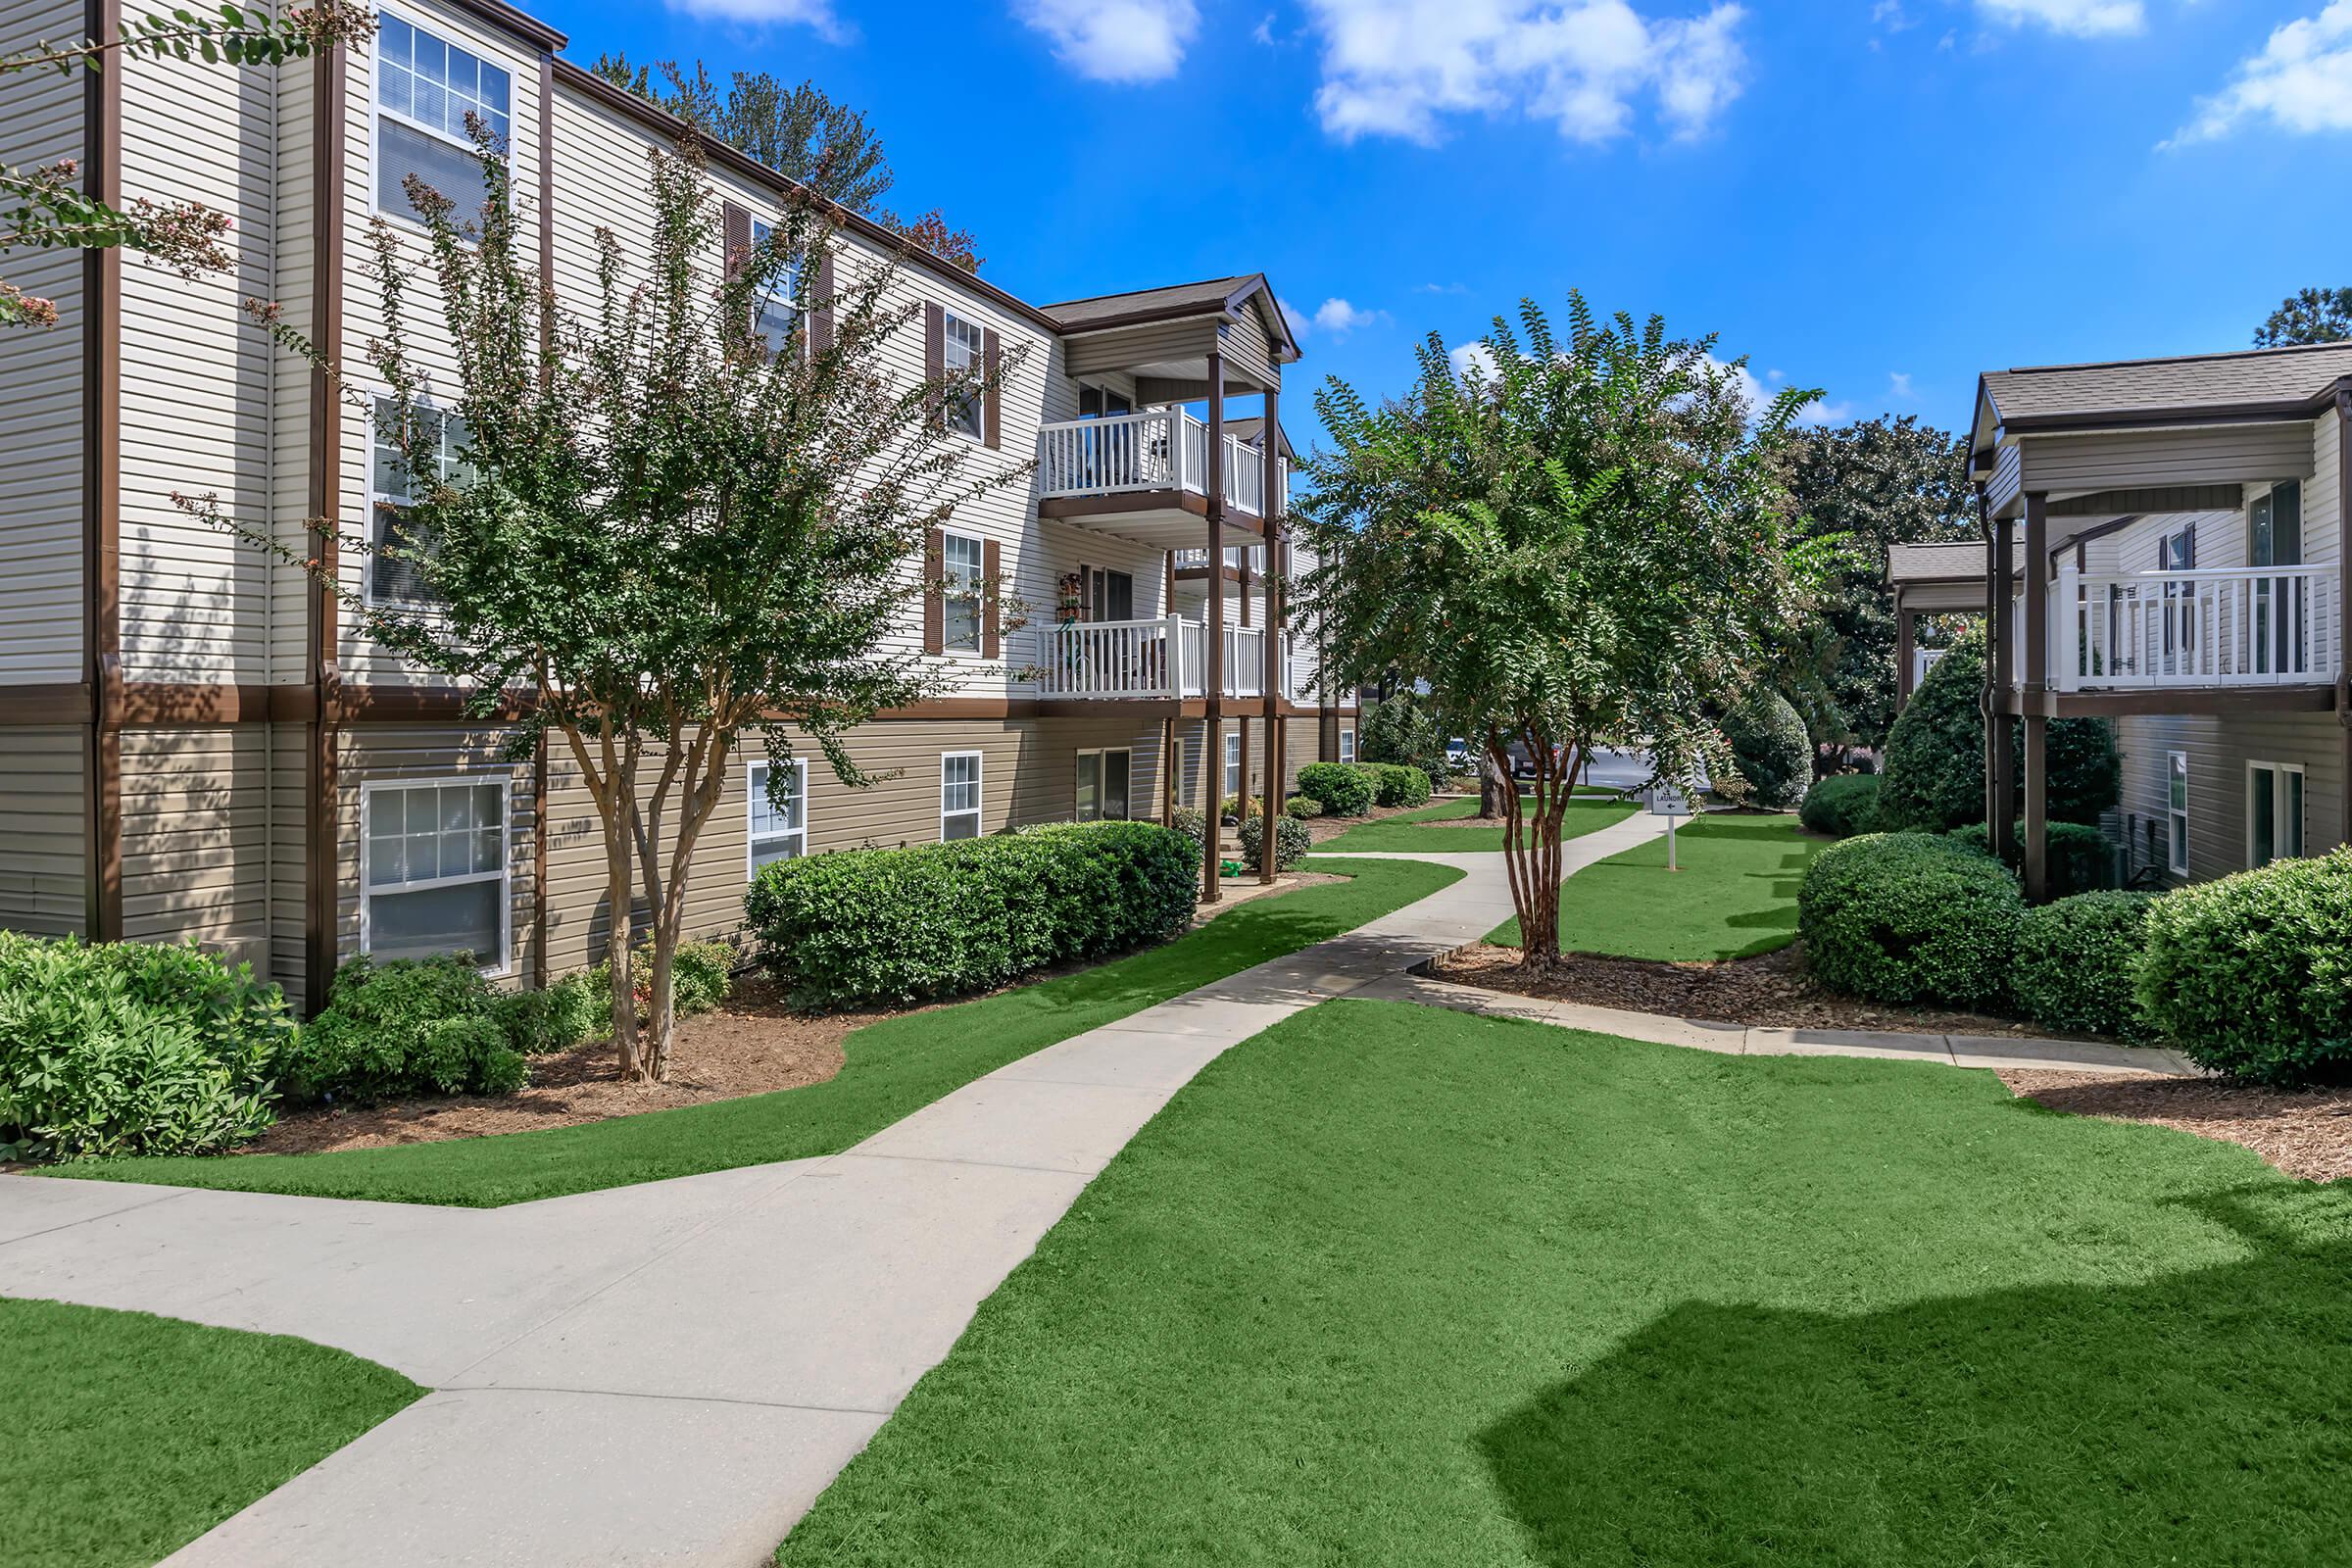 400 WINCHESTER APARTMENT HOMES FOR RENT IN ATLANTA, GA